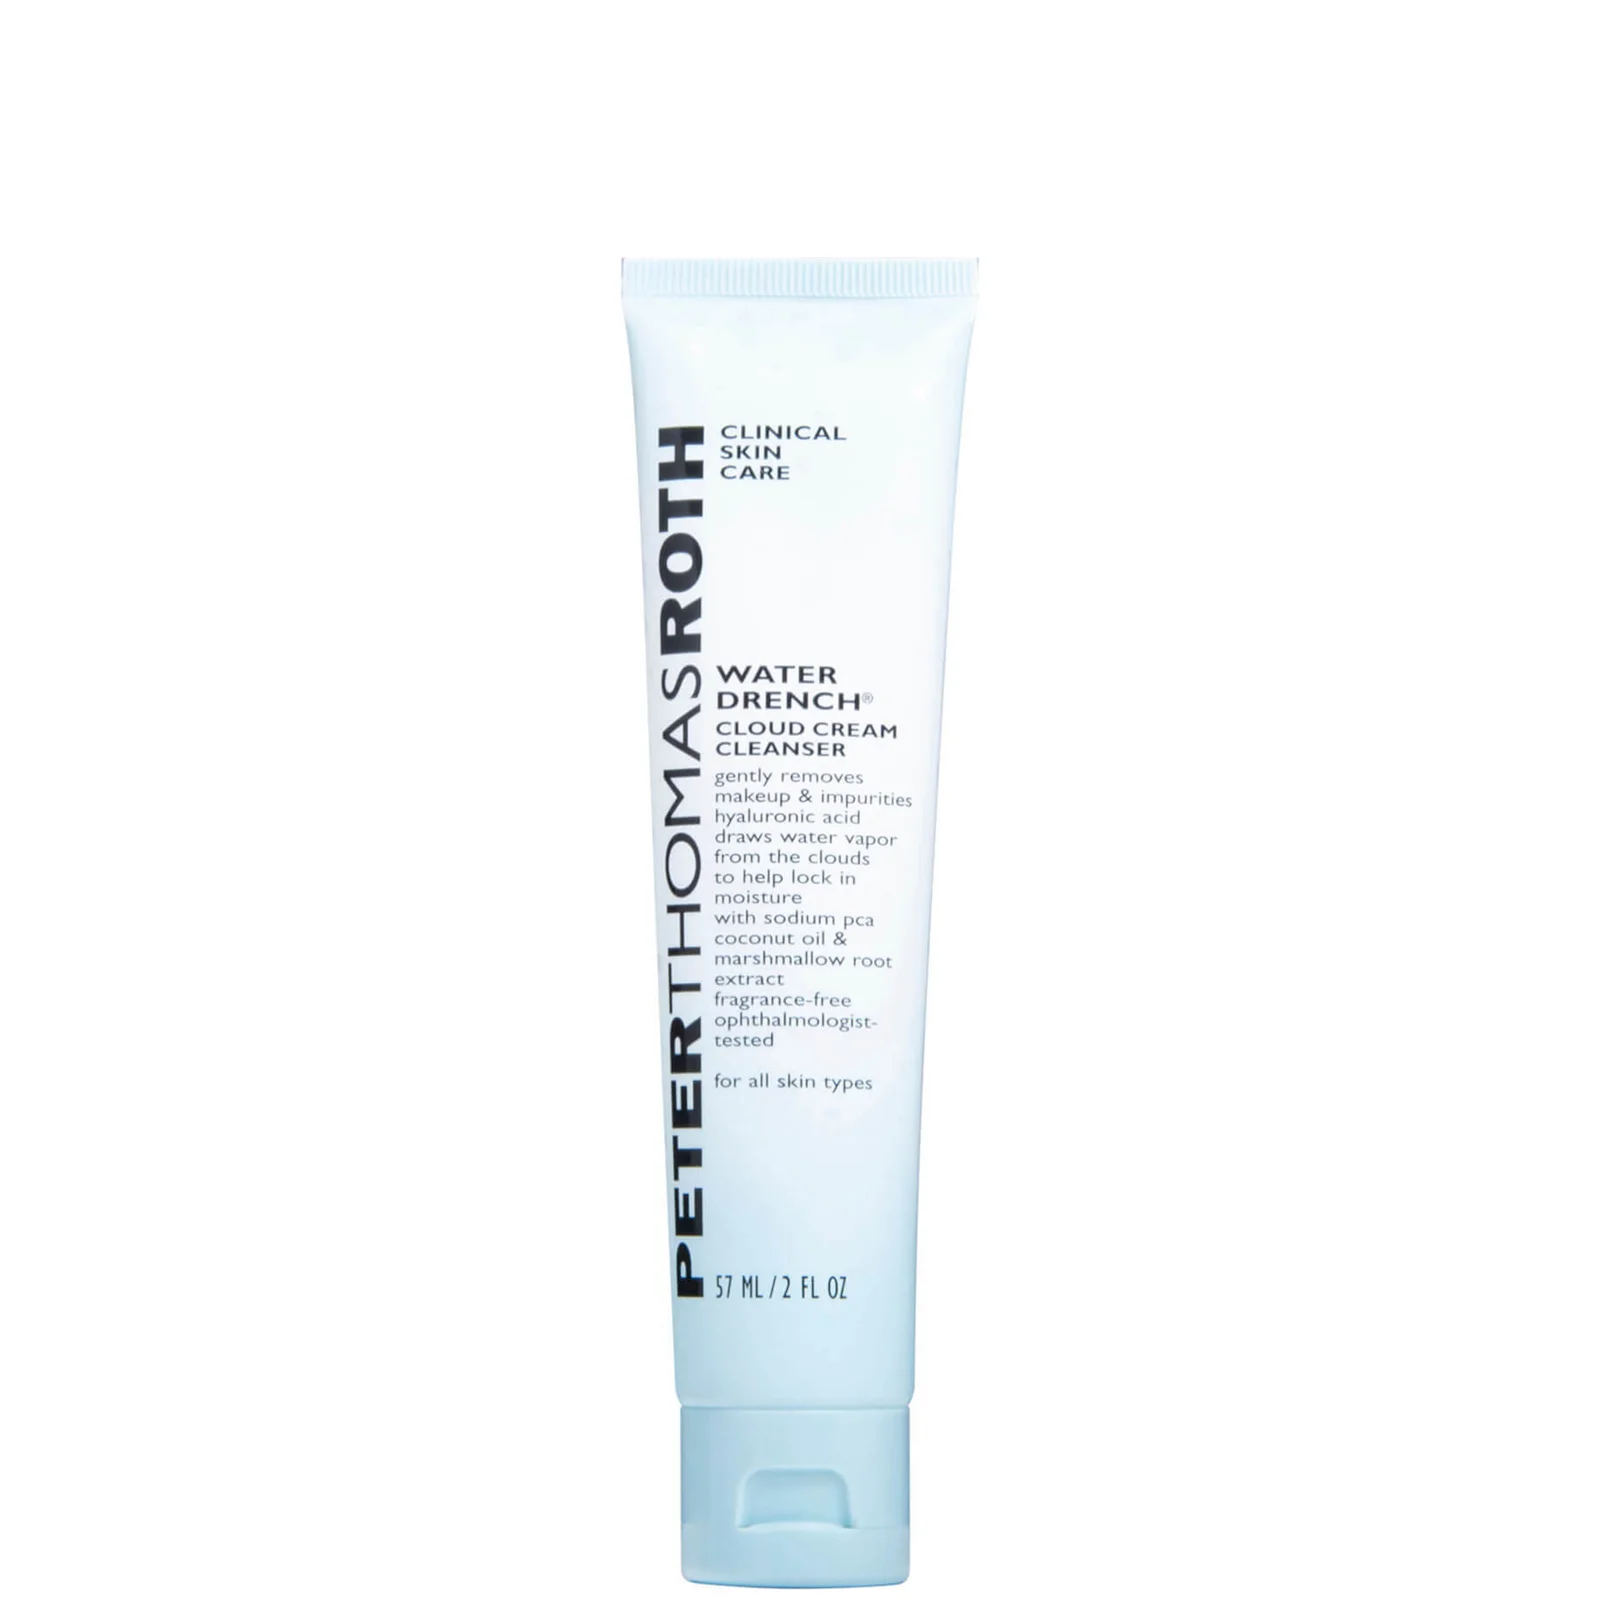 Peter Thomas Roth Water Drench Cloud Cream Cleanser 120ml Image 1